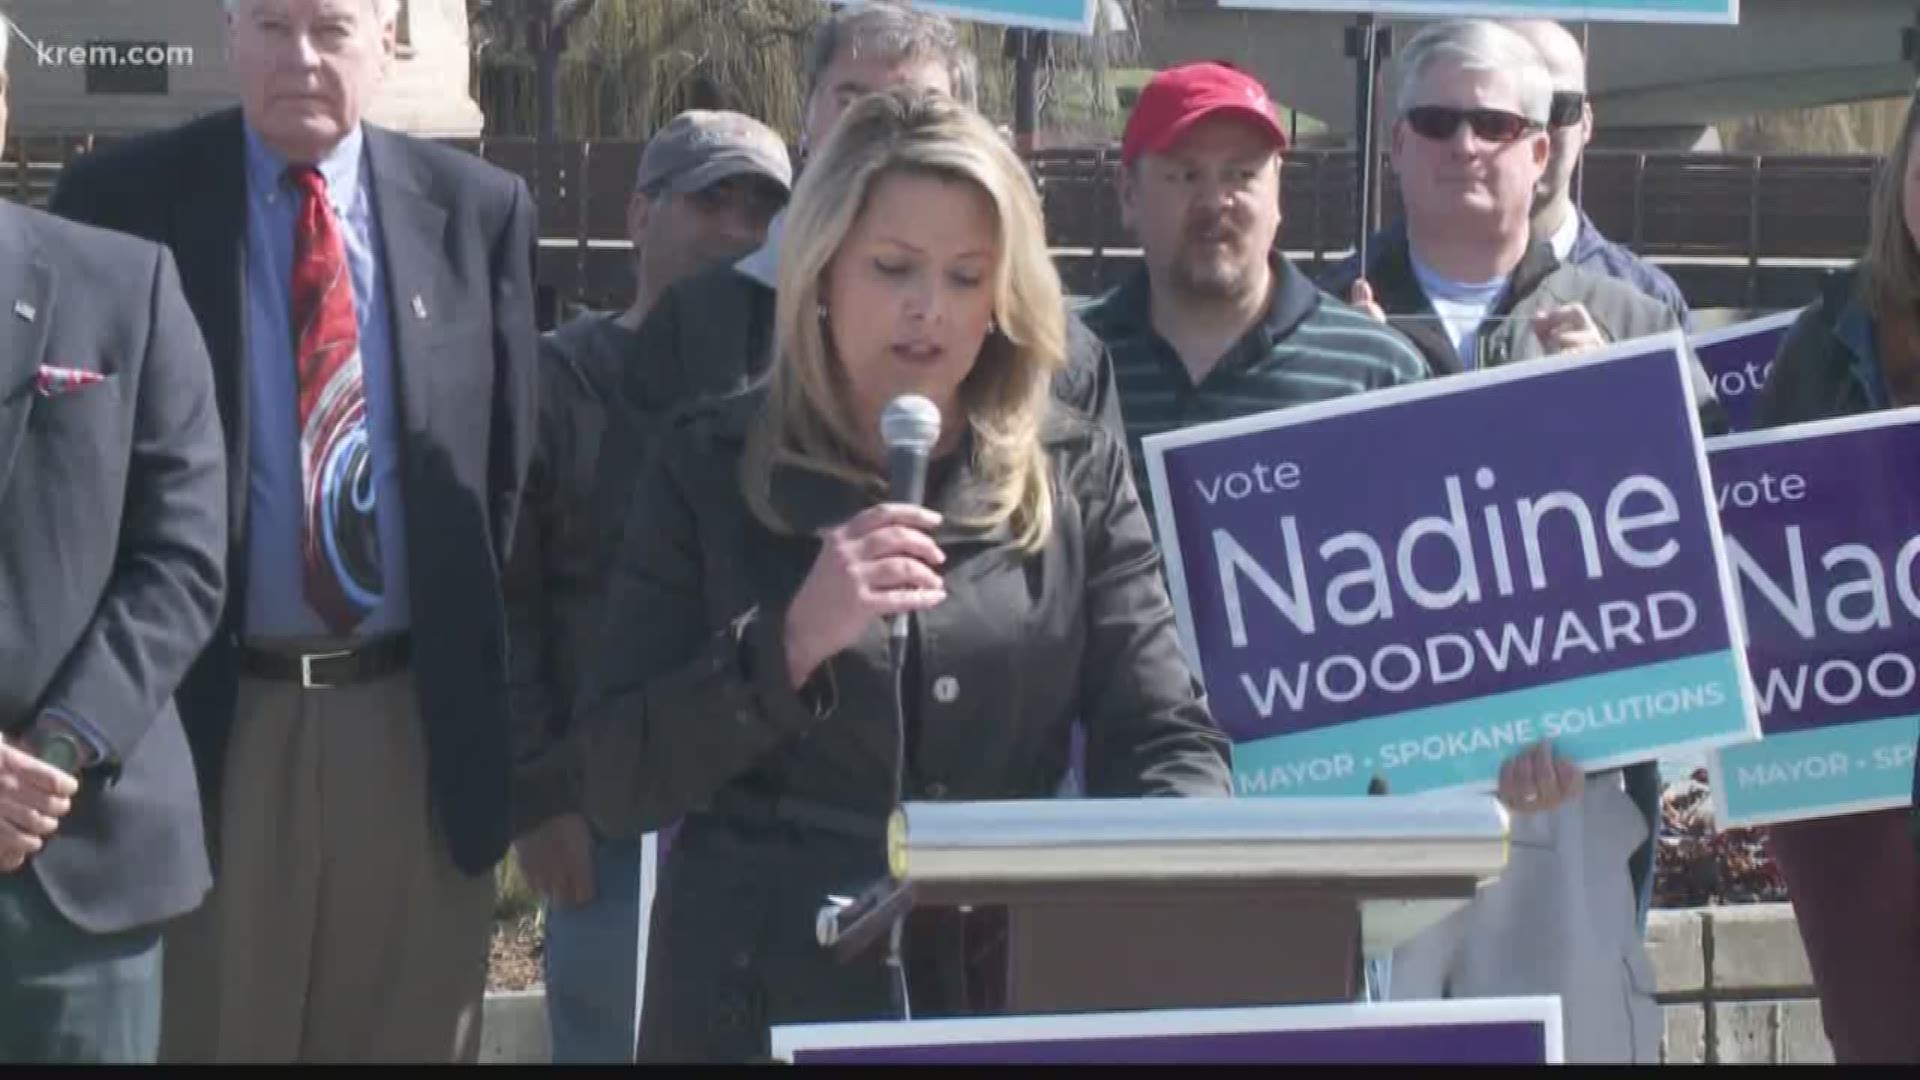 KREM Reporter Alexa Block attended former KREM and KXLY news anchor Nadine Woodward's press conference where she announced her candidacy for mayor.